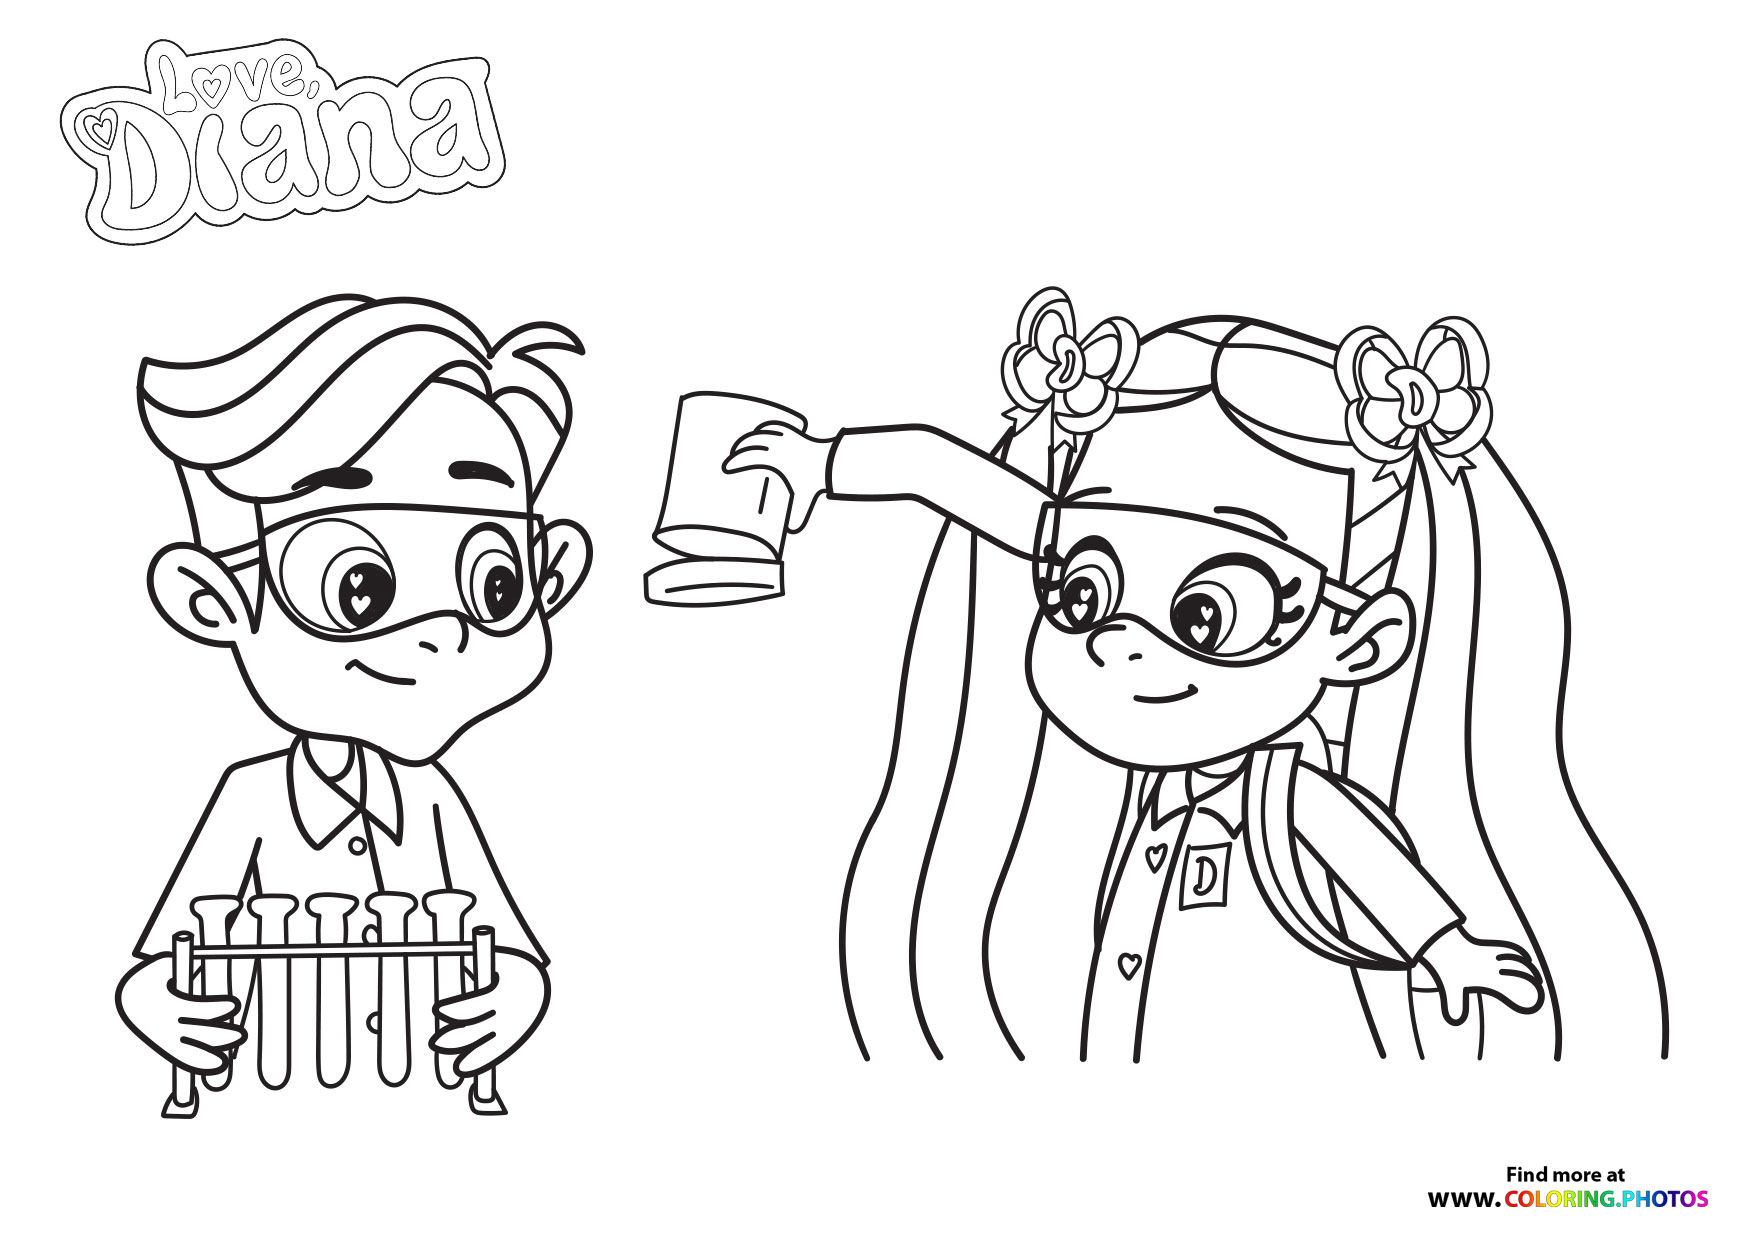 Diana and Roma - Coloring Pages for kids